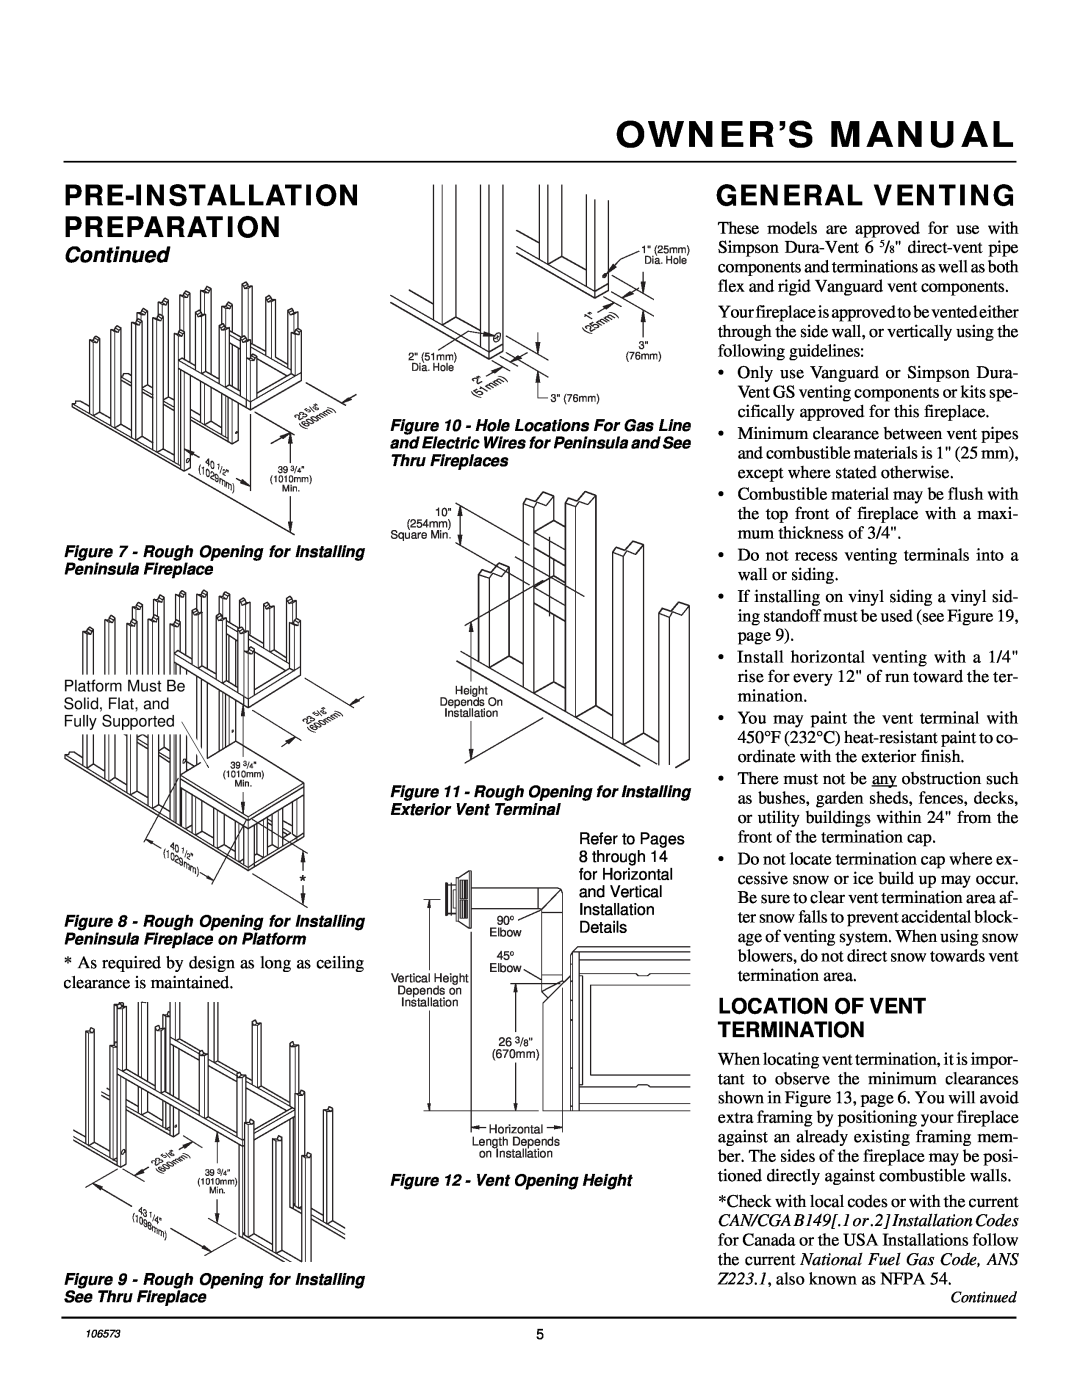 Desa EVDDVF36STN General Venting, Continued, Location Of Vent Termination, Owner’S Manual, Pre-Installation Preparation 